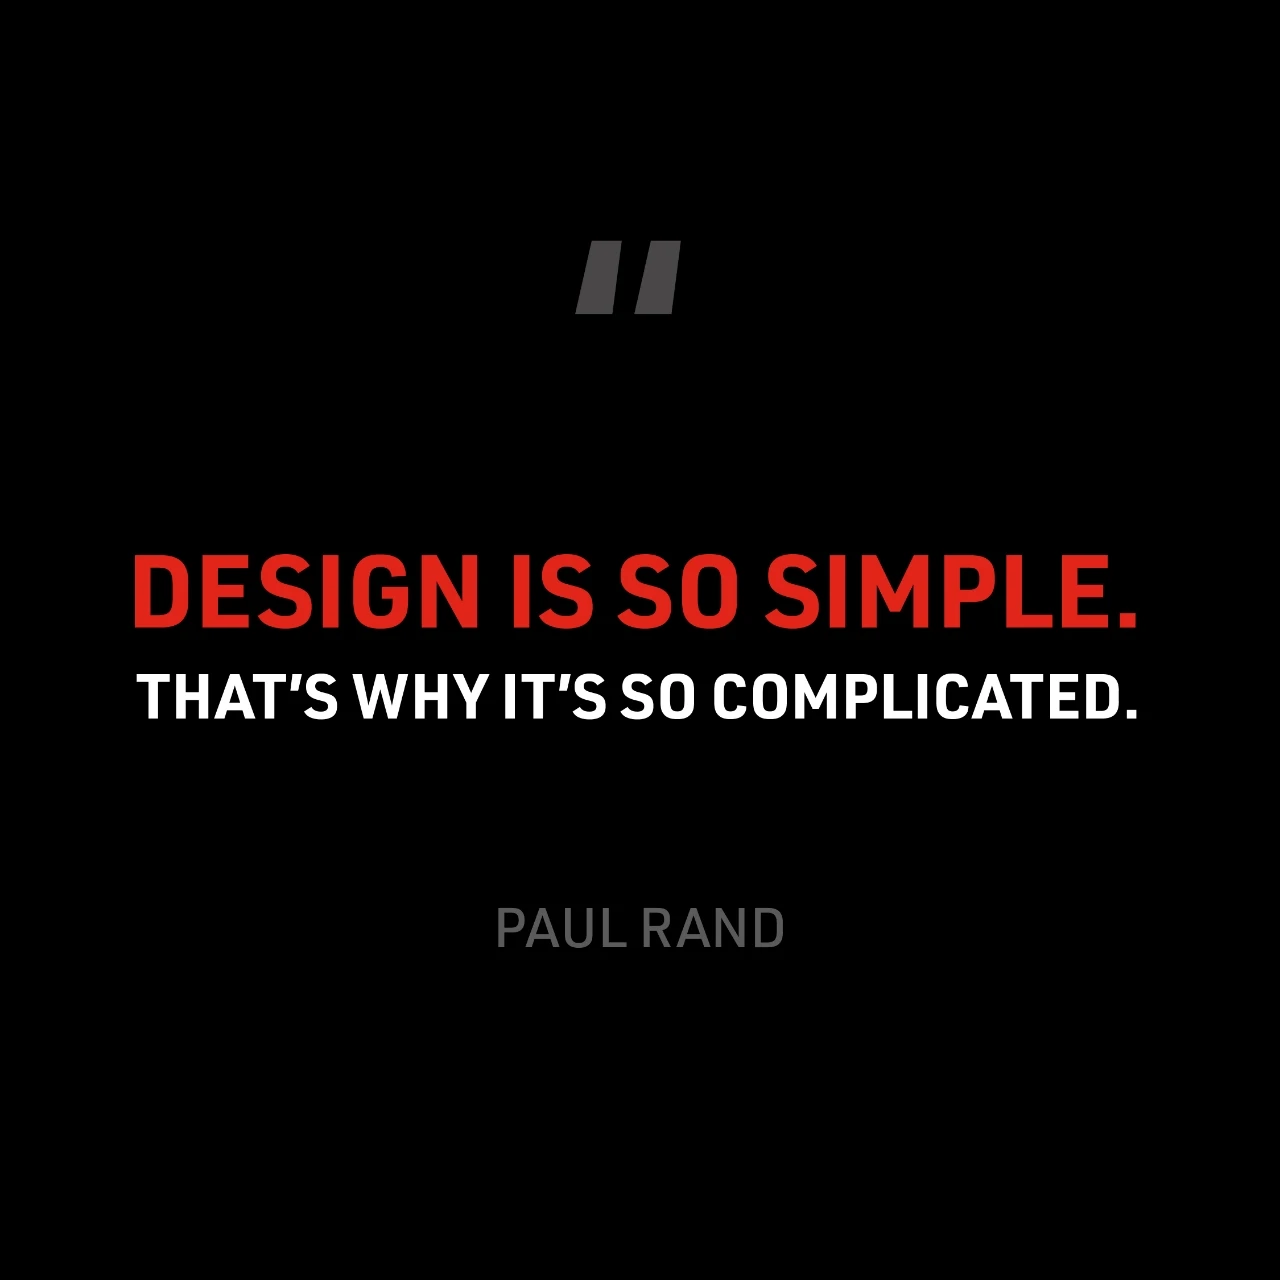 Design is so simple that's why it's so complicated paul rand.